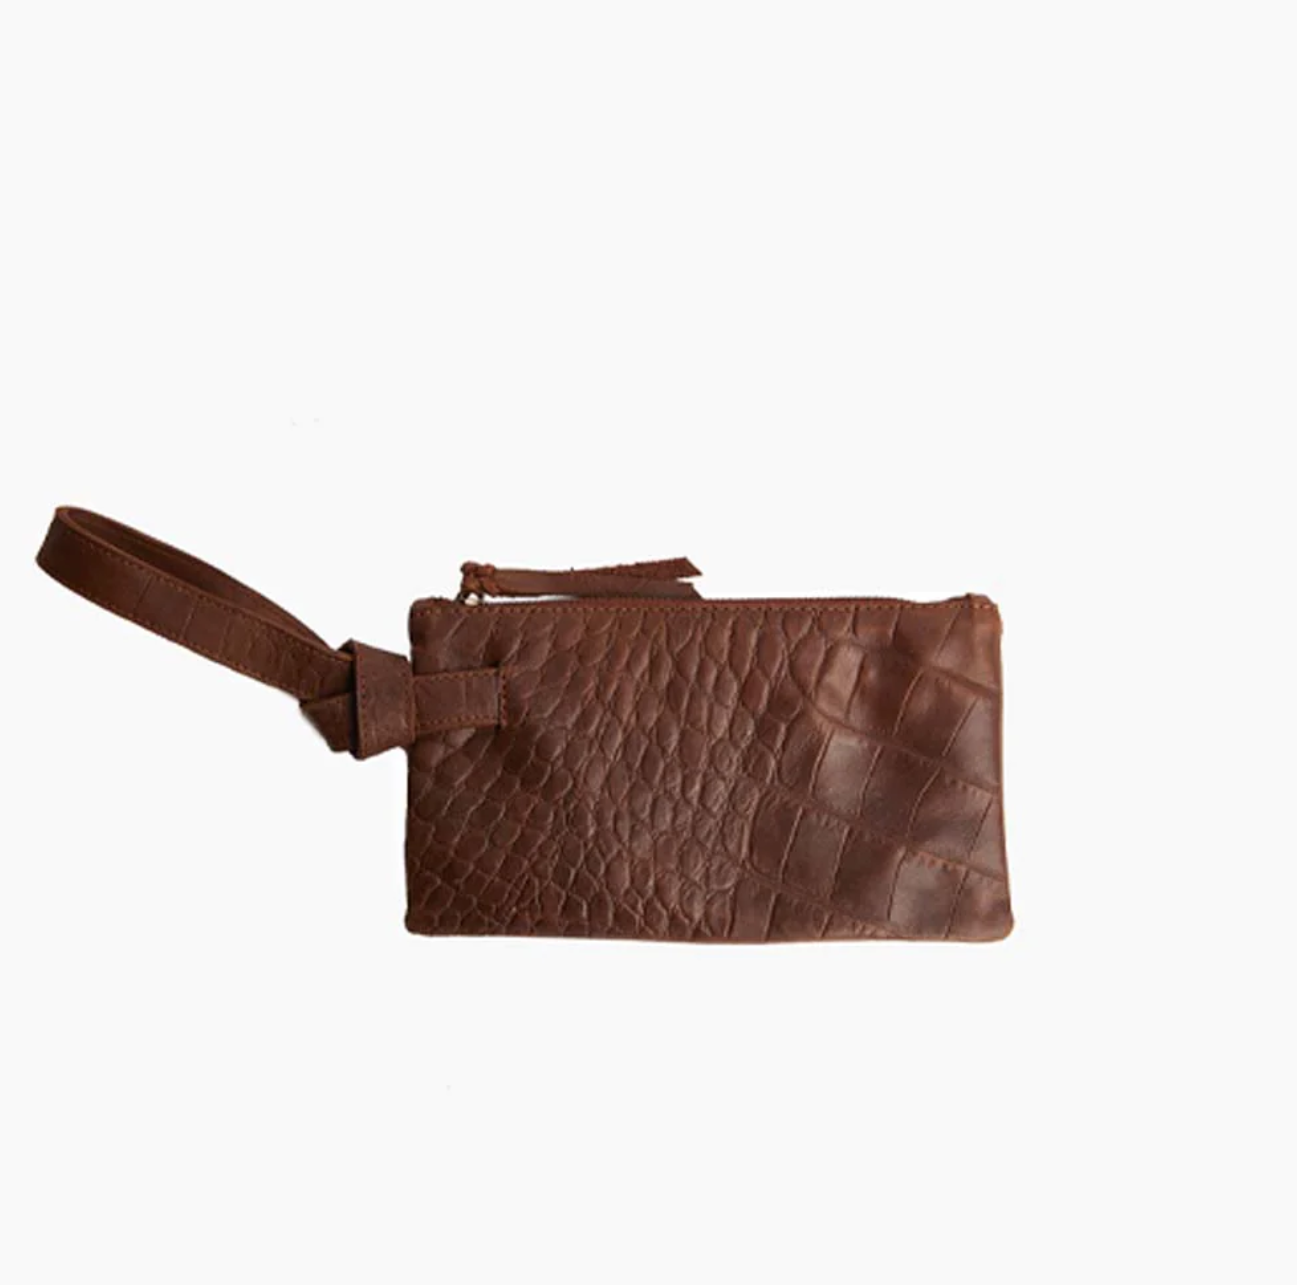 Able Rachel Wristlet Clutches in Choco Croc at Wrapsody